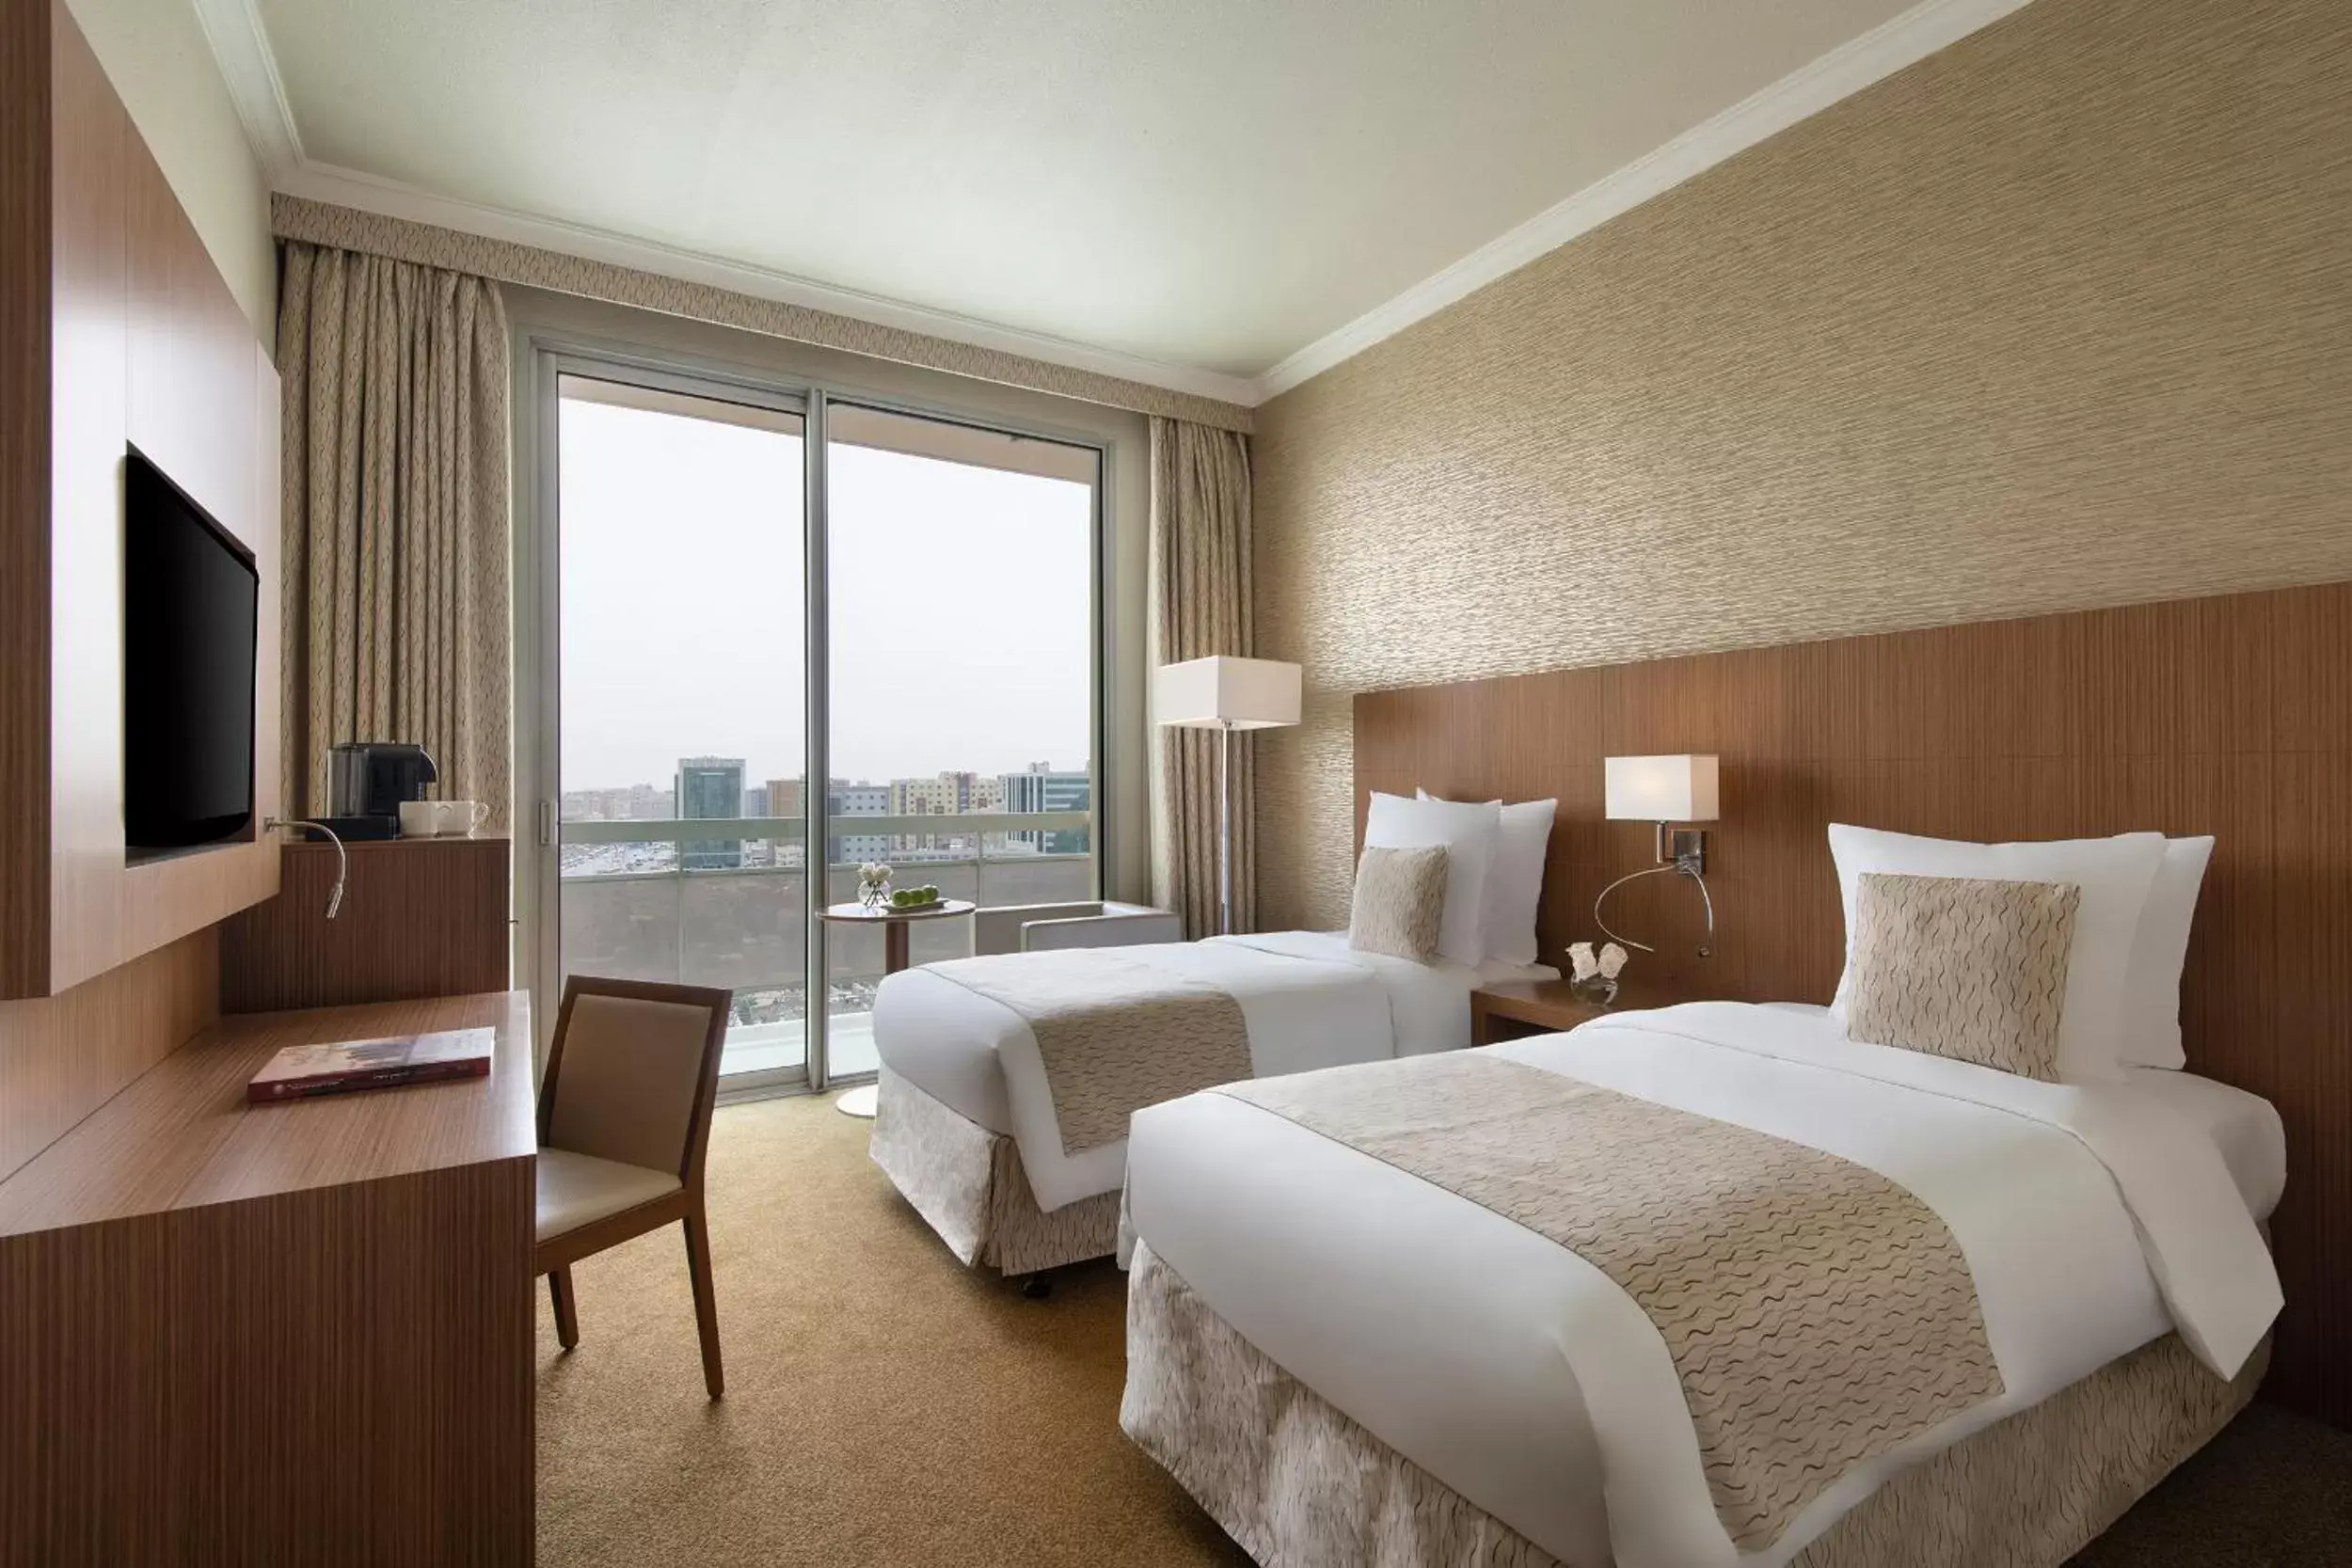 Property building in M Grand Hotel Doha